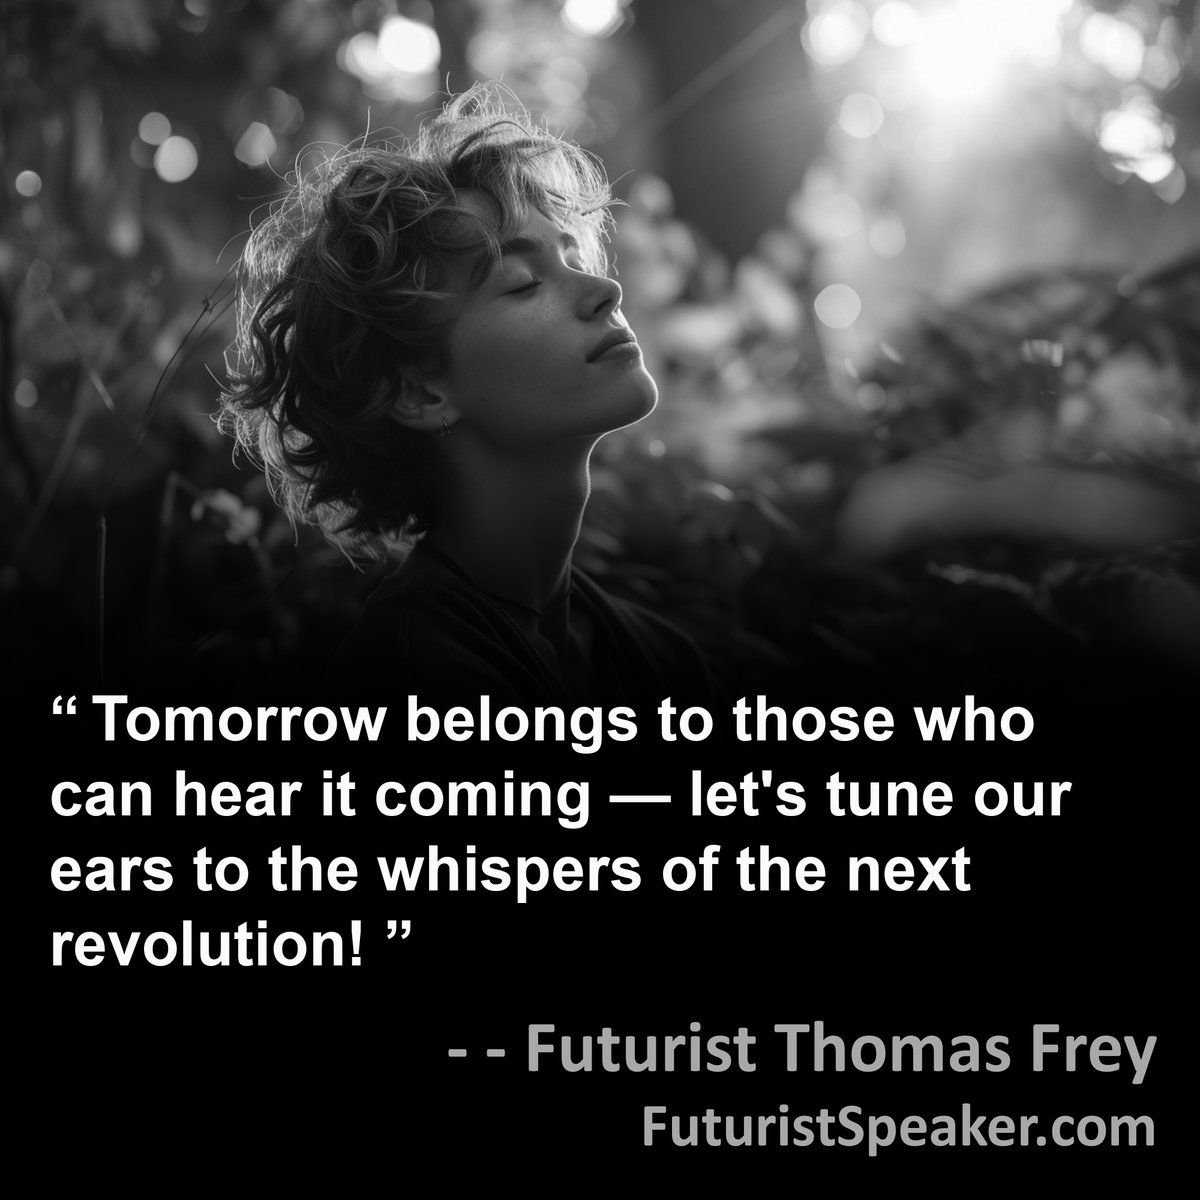 'Tomorrow belongs to those who can hear it coming — let's tune our ears to the whispers of the next revolution!' -Futurist Thomas Frey FuturistSpeaker.com #foresight #predictions #futuretrends #futureofwork #futurejobs #keynotespeaker #futuriststrategy #mostquoted